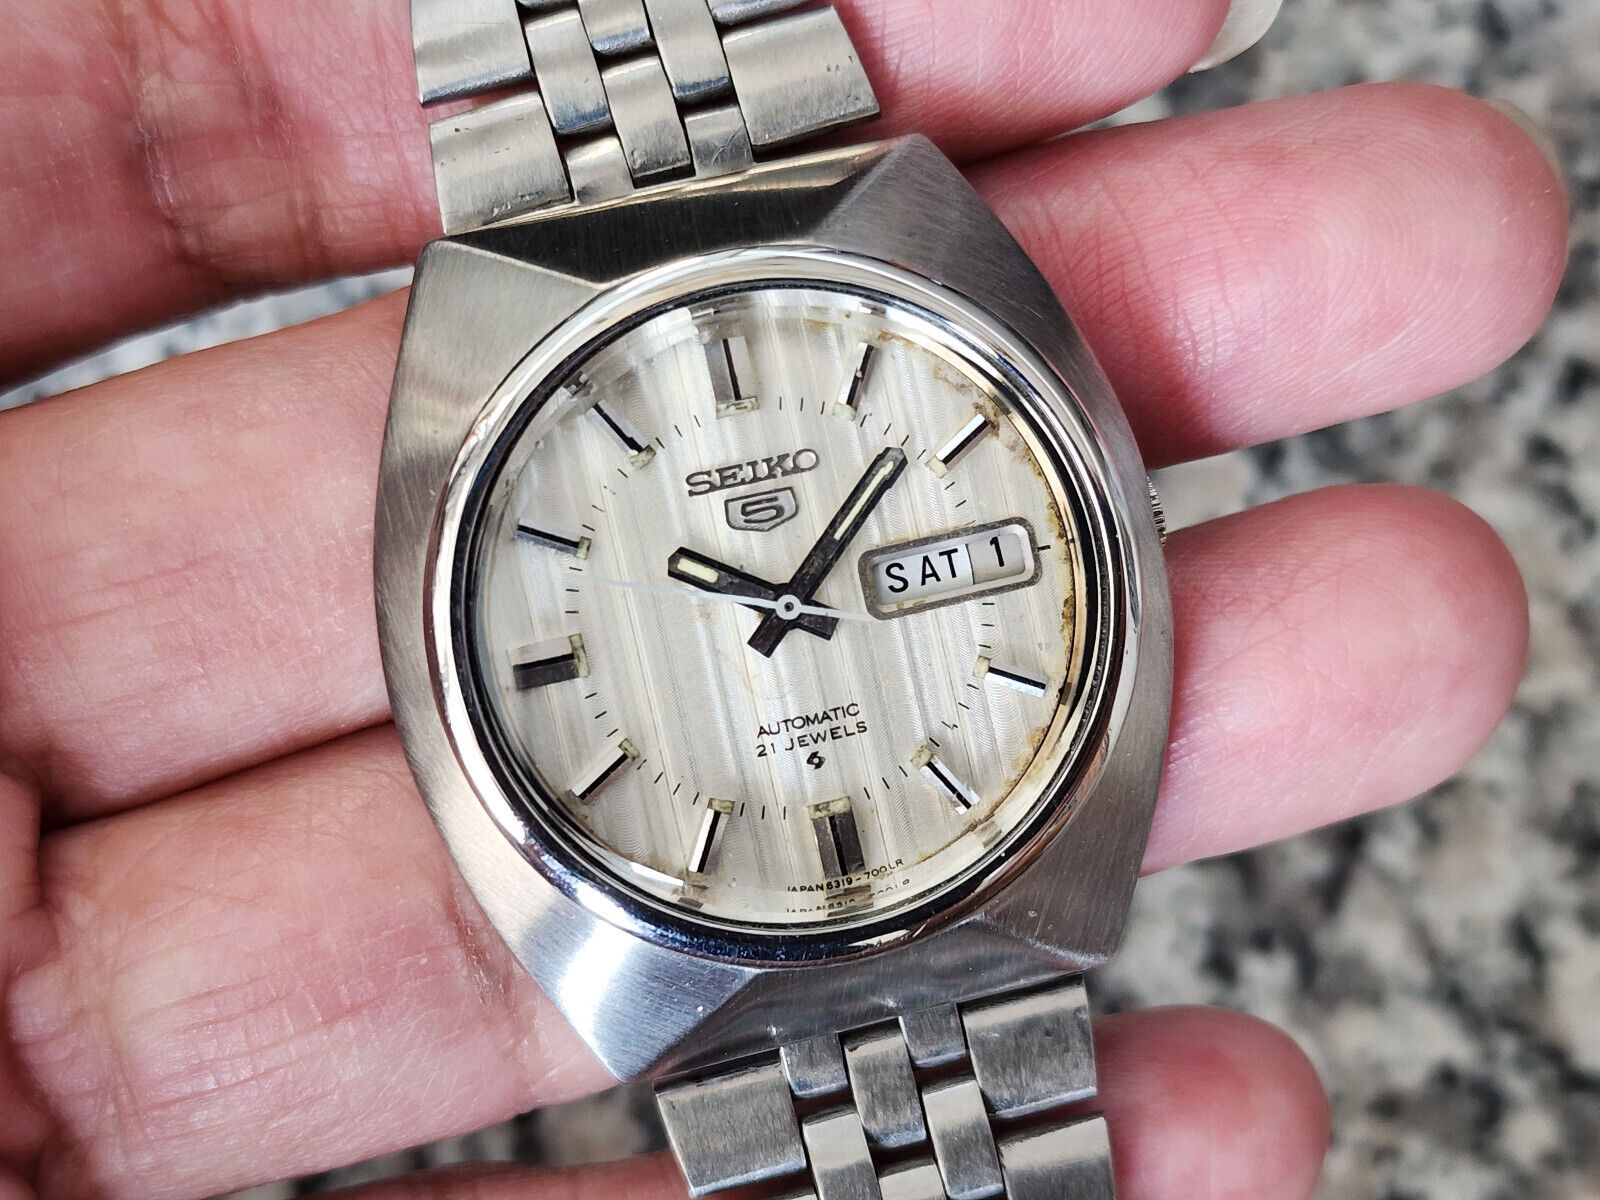 VINTAGE SEIKO 6319-7000 AUTOMATIC MEN'S WATCH FACET CRYSTAL GENTS